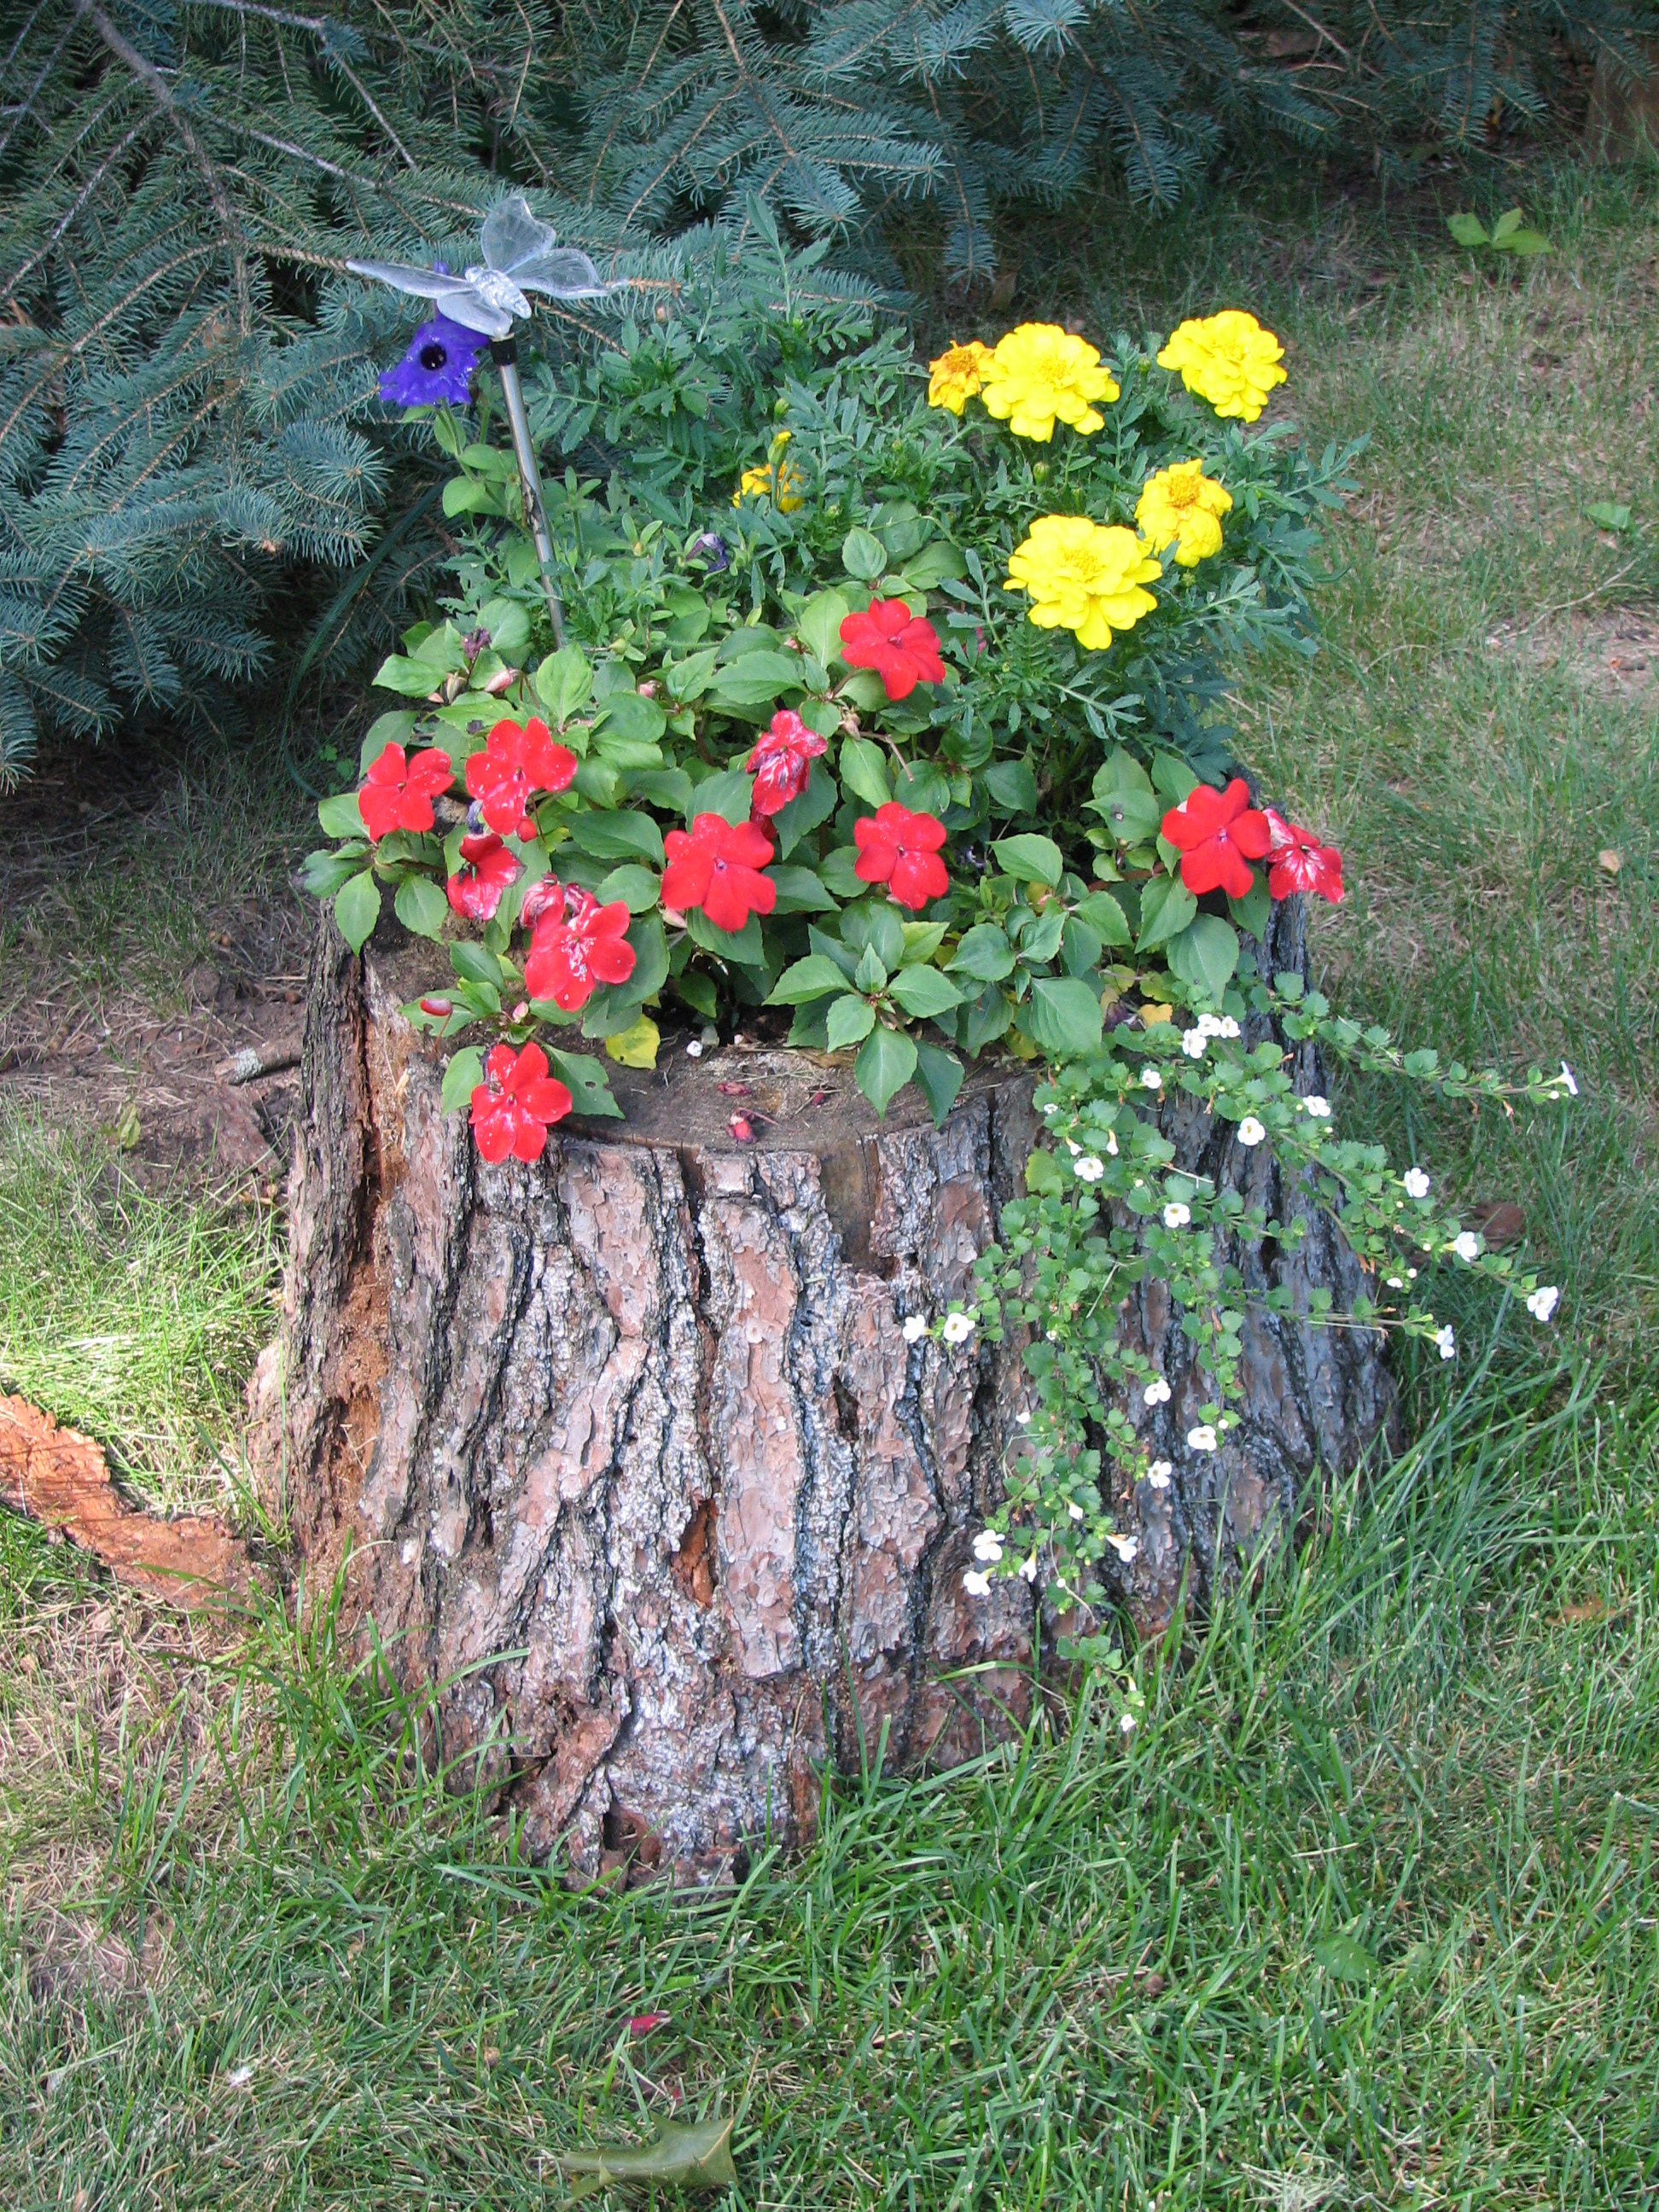 Tree Trunk Ideas That Make Excellent Decor For Your Garden